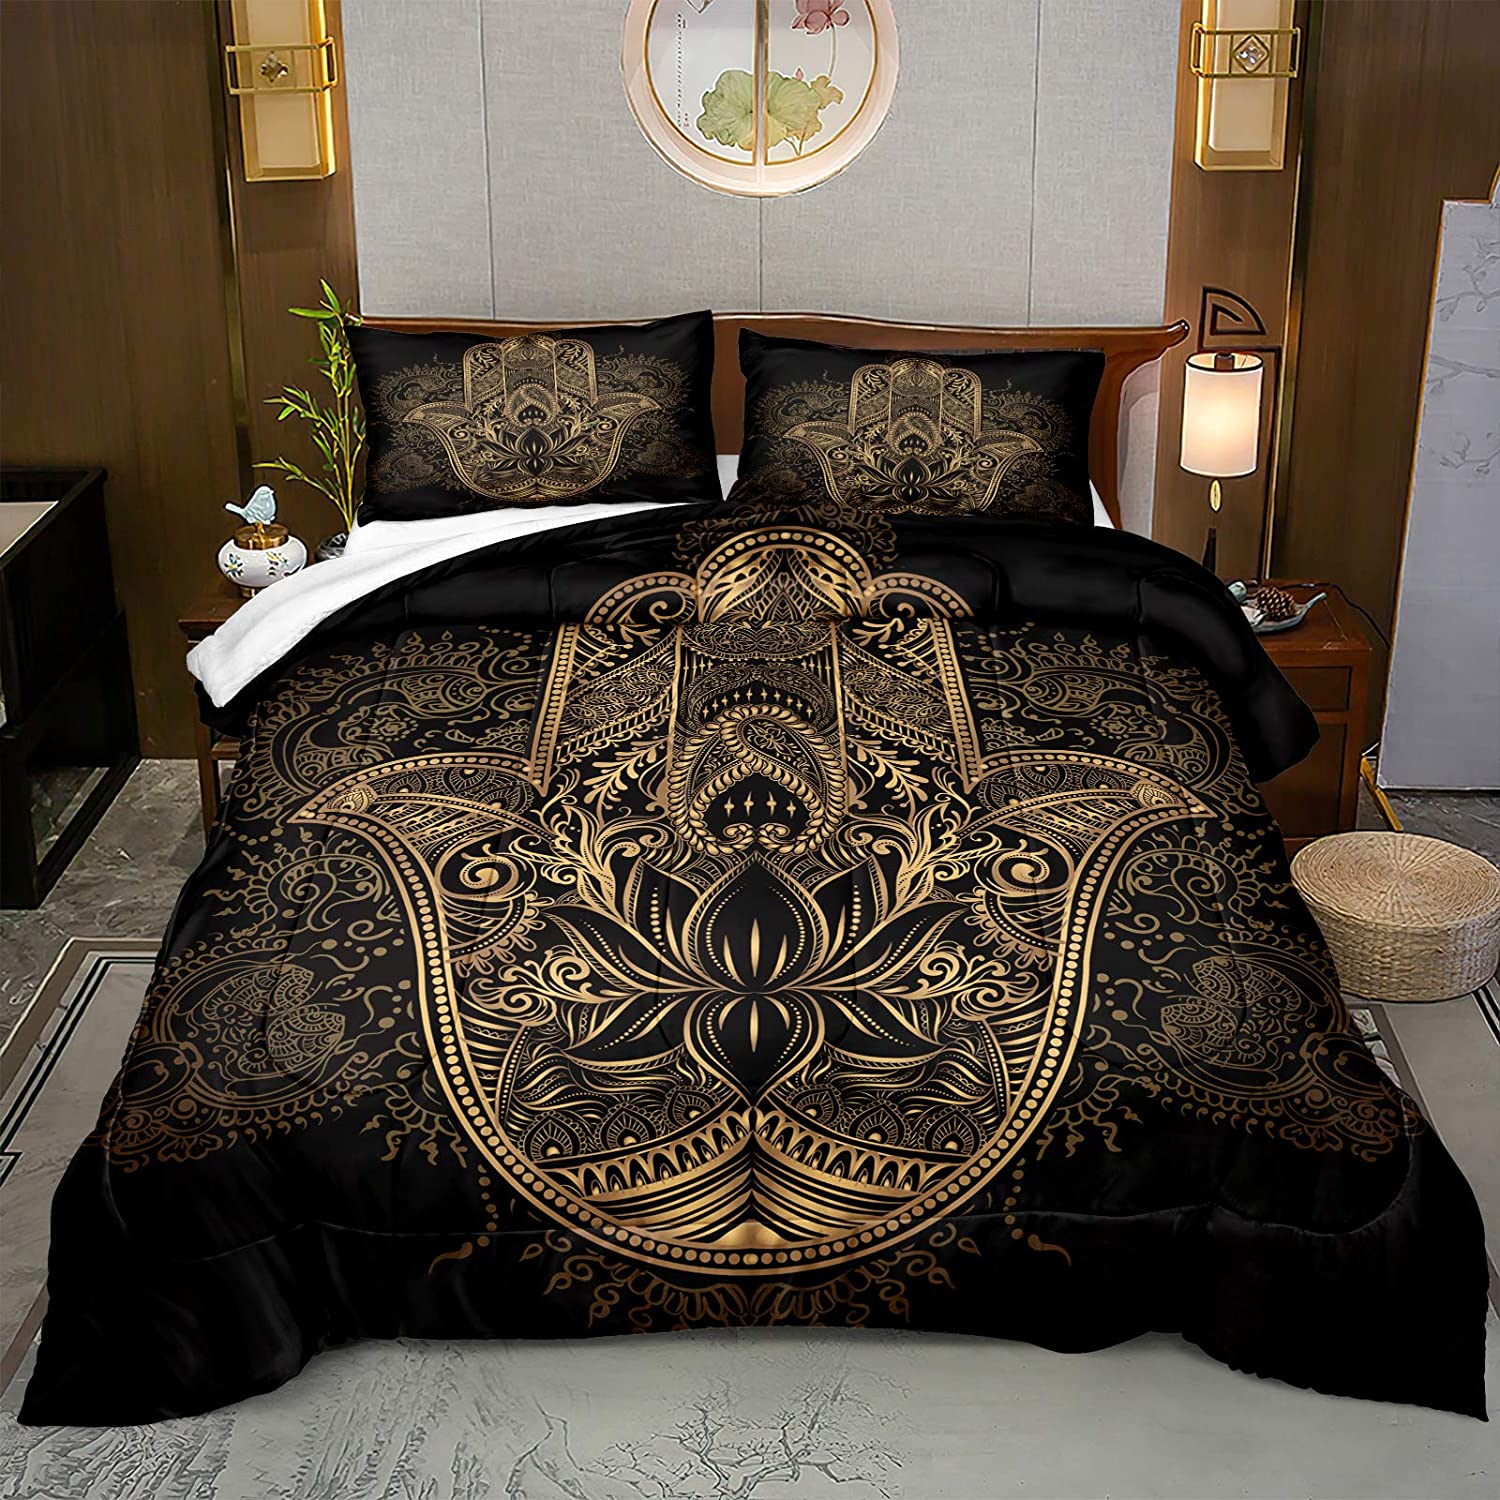 Luxurious Black and Gold Comforter Sets